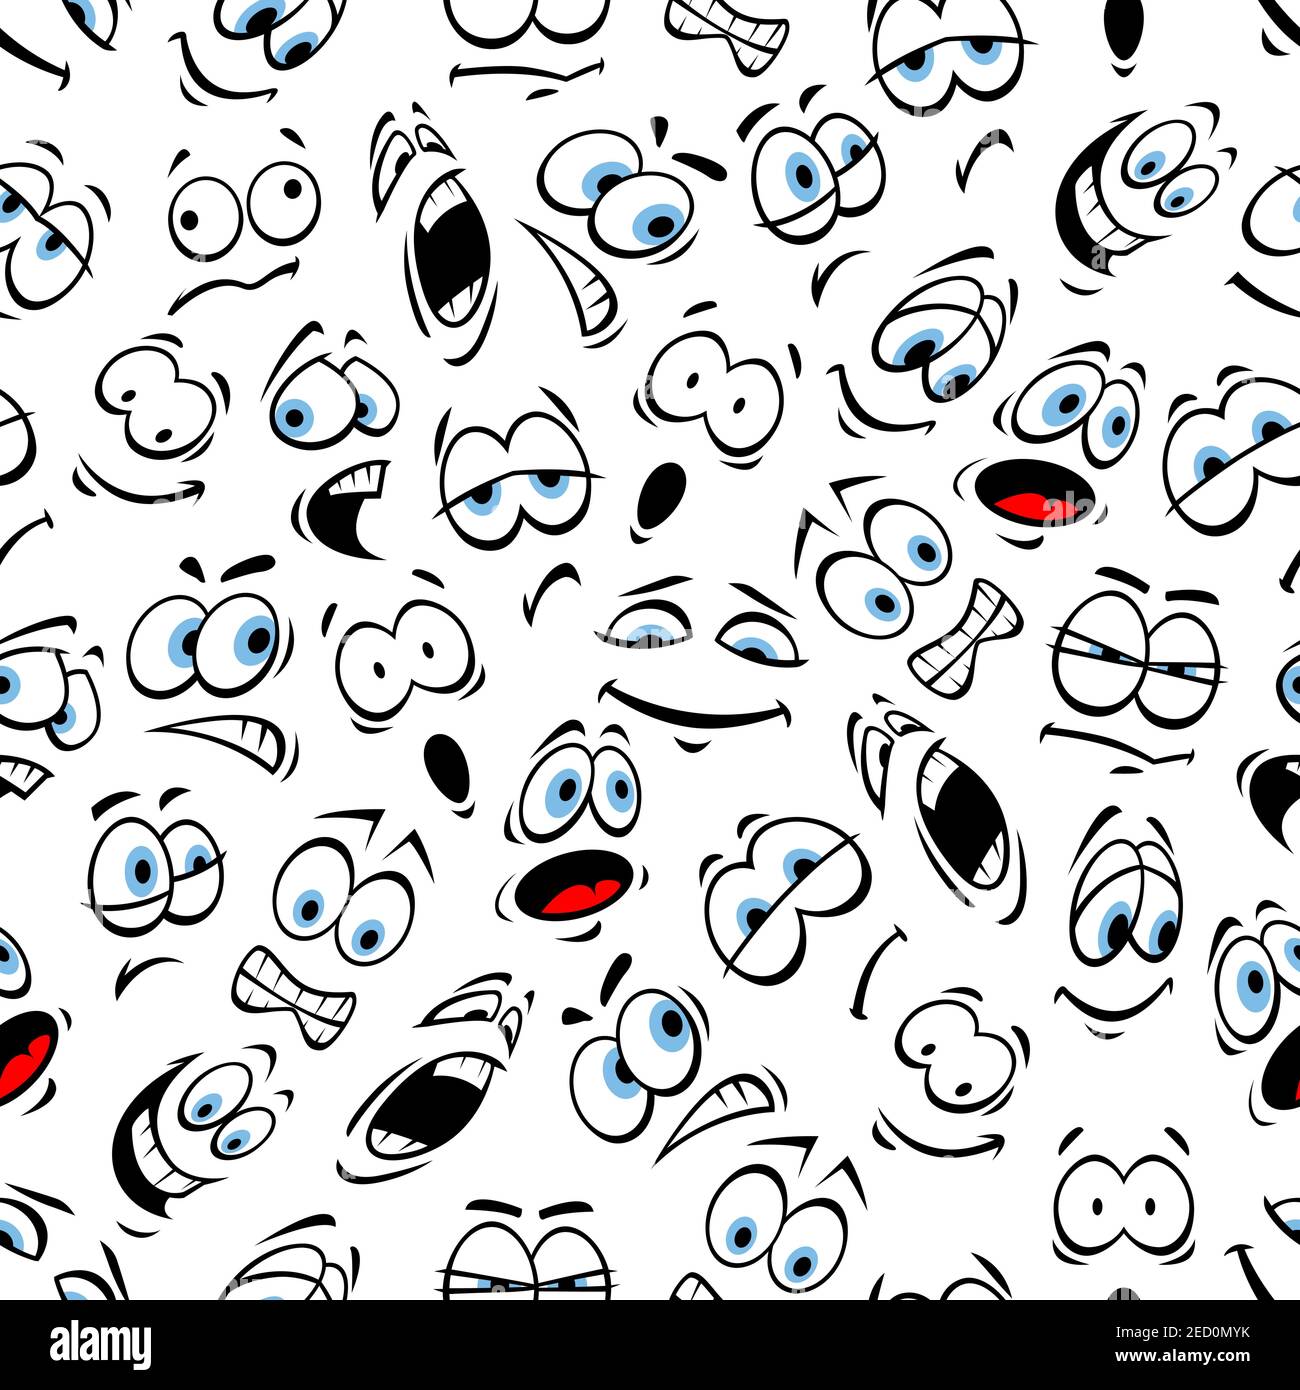 Emoticons pattern of human face emotions. Vector seamless pattern of cartoon human face with mood expression smiling, bored, winking, happy, surprised Stock Vector